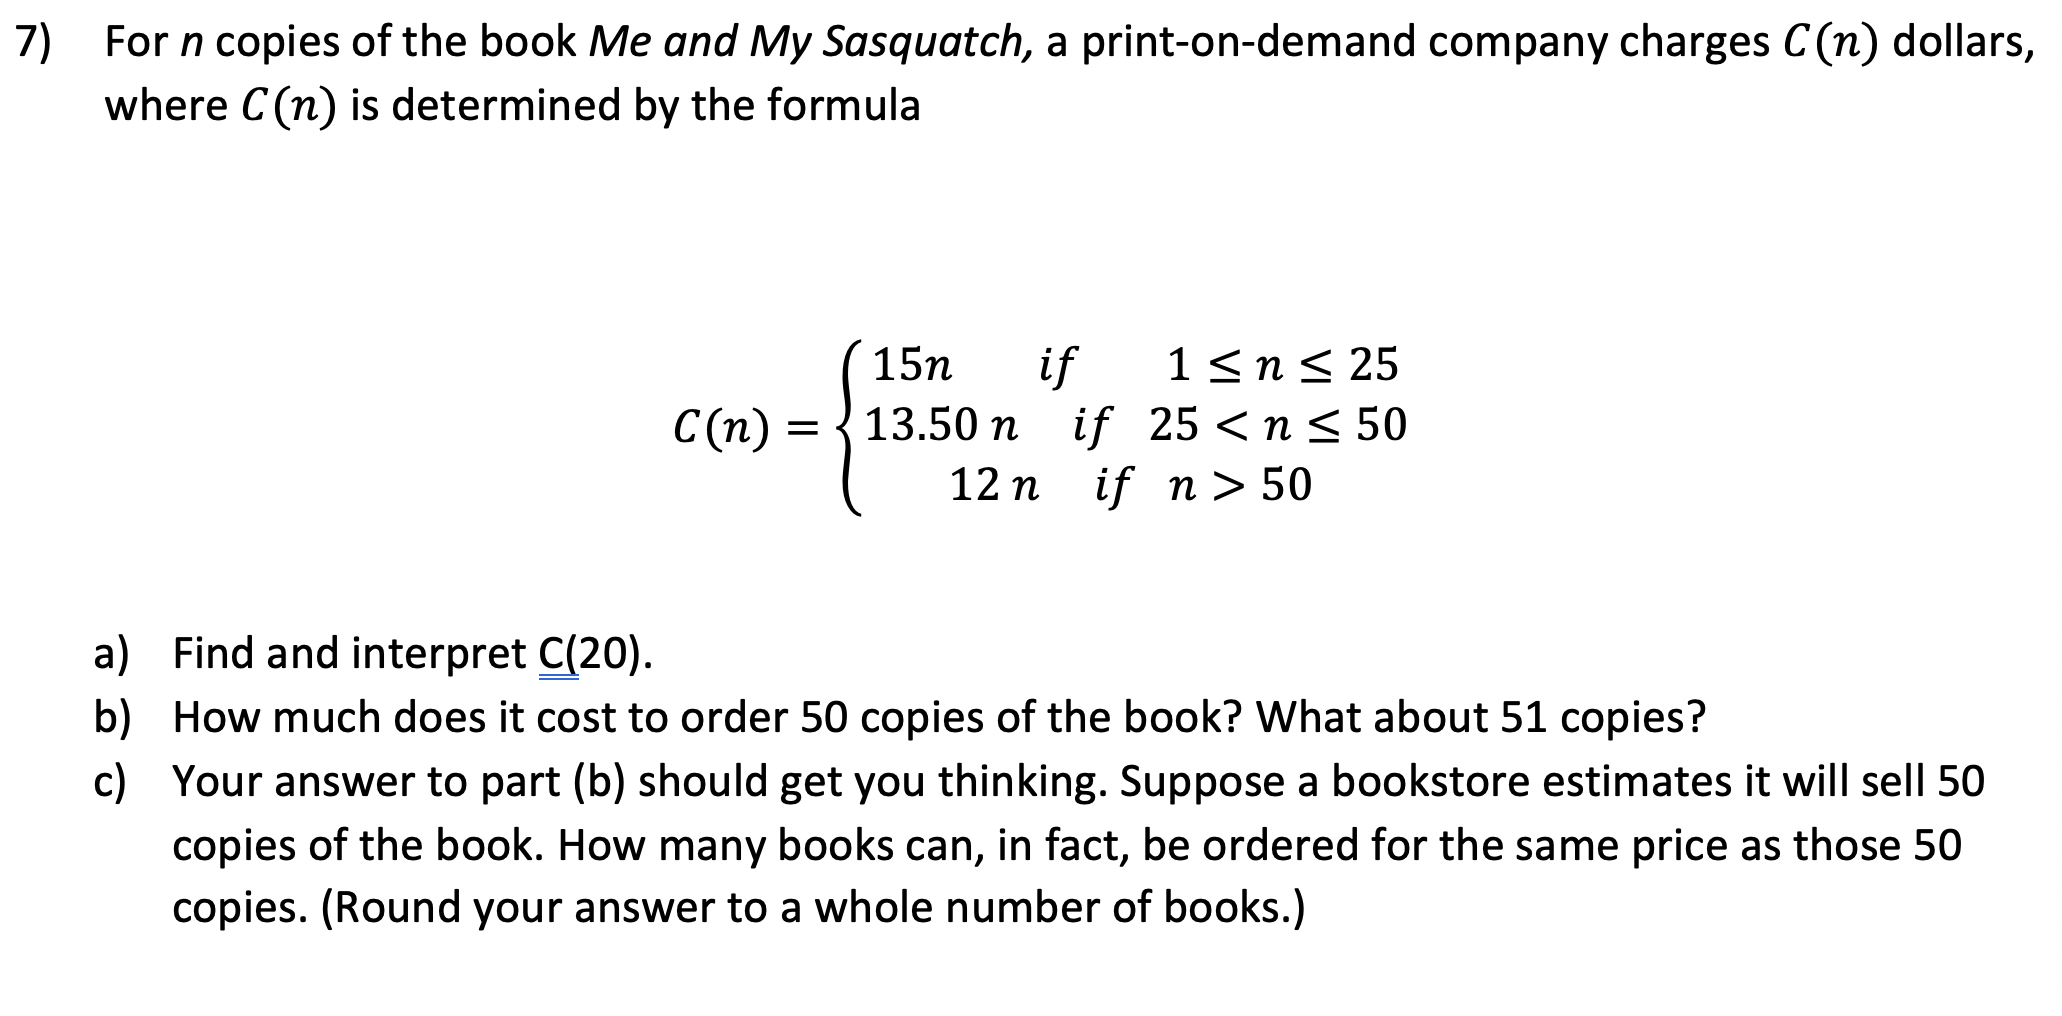 7) For n copies of the book Me and My Sasquatch, a print-on-demand company charges C(n) dollars,
where C(n) is determined by the formula
15n
if
1<n< 25
C(n)
С (п) %3D3
13.50 n if 25 <n < 50
12 n if n > 50
a) Find and interpret C(20).
b) How much does it cost to order 50 copies of the book? What about 51 copies?
